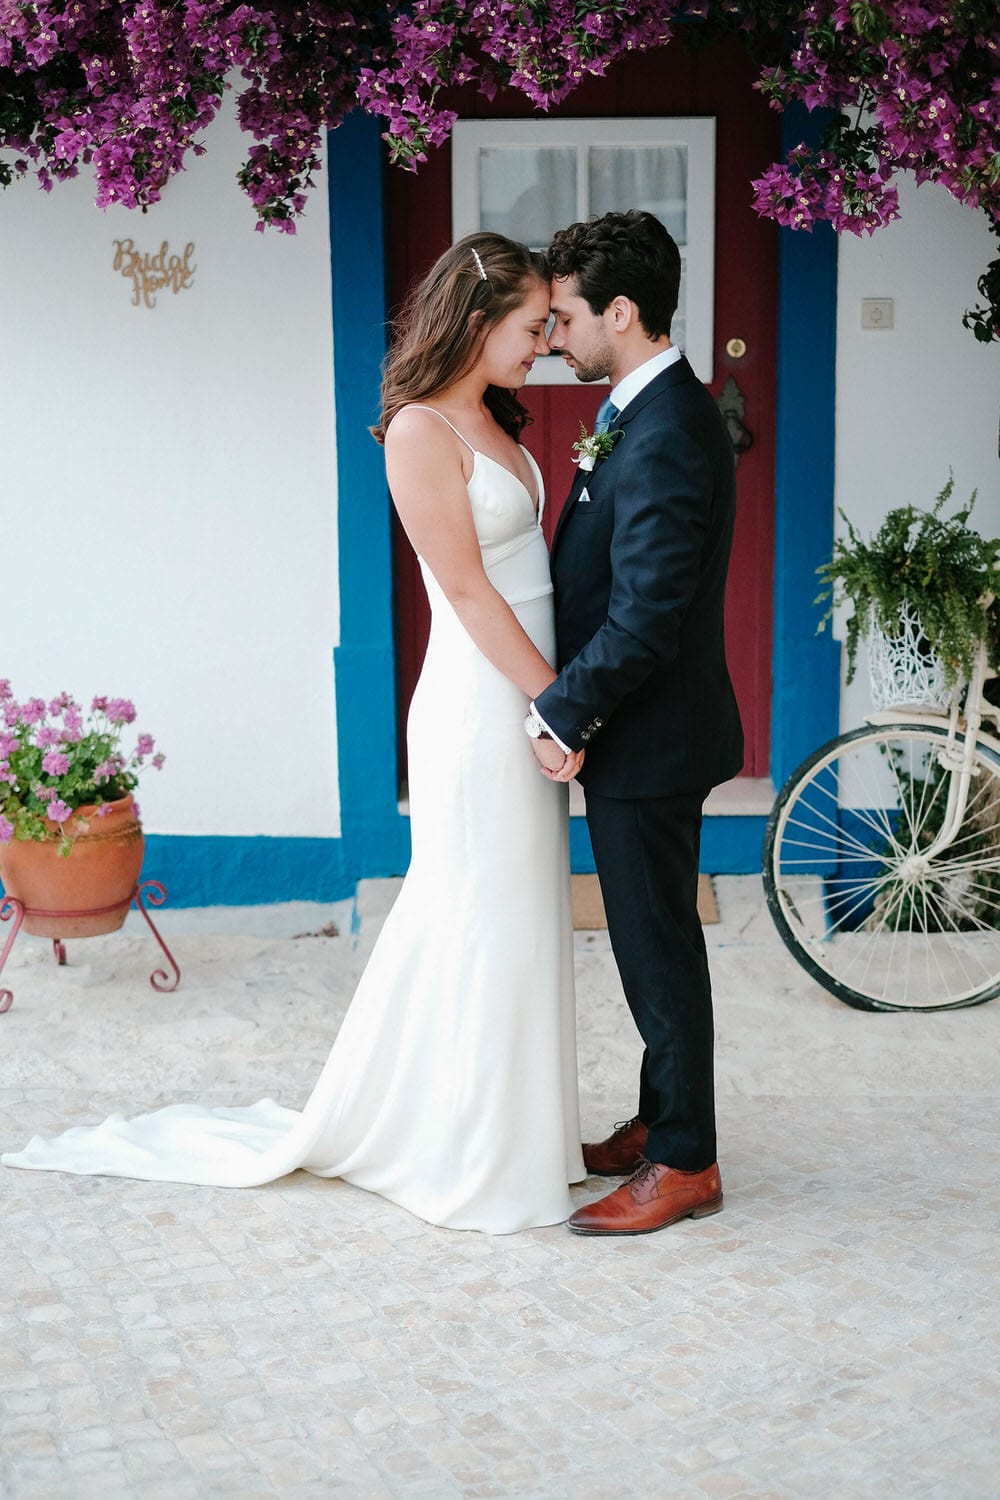 The bride and groom gaze at each other in front of a beautiful bougainvillea and a rustic bike in white, blue, and red at Quinta da Bichinha with a typical Portuguese facade